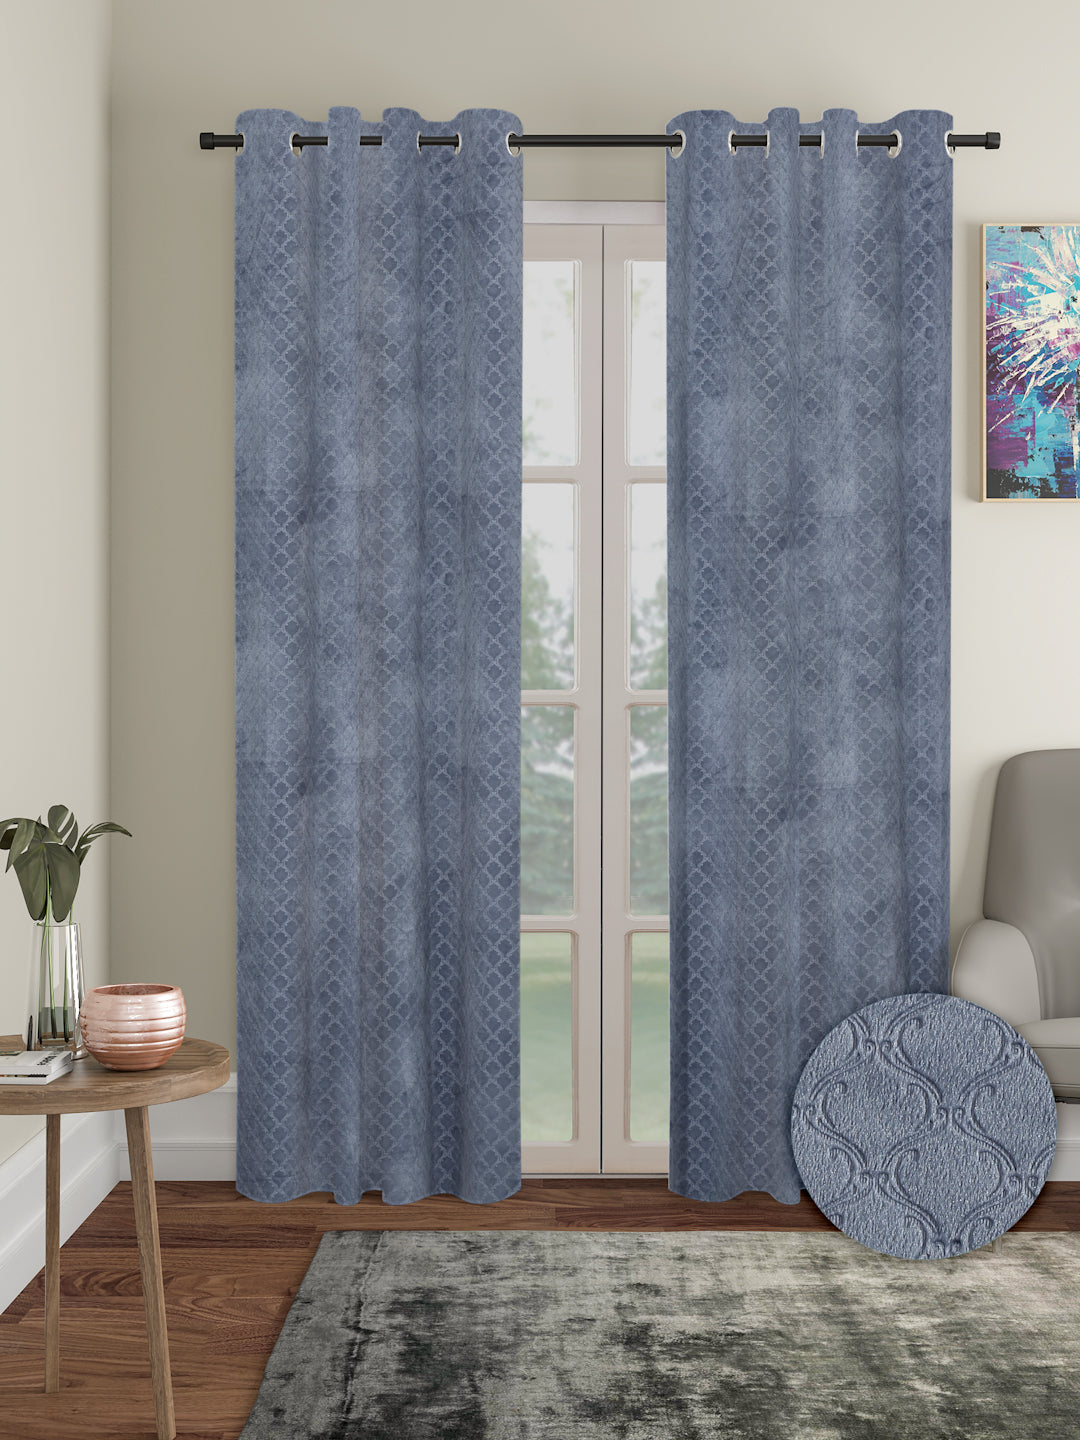 Set of 2 Velvet Blackout Long Door Curtains with 5 Cushion Covers- Grey